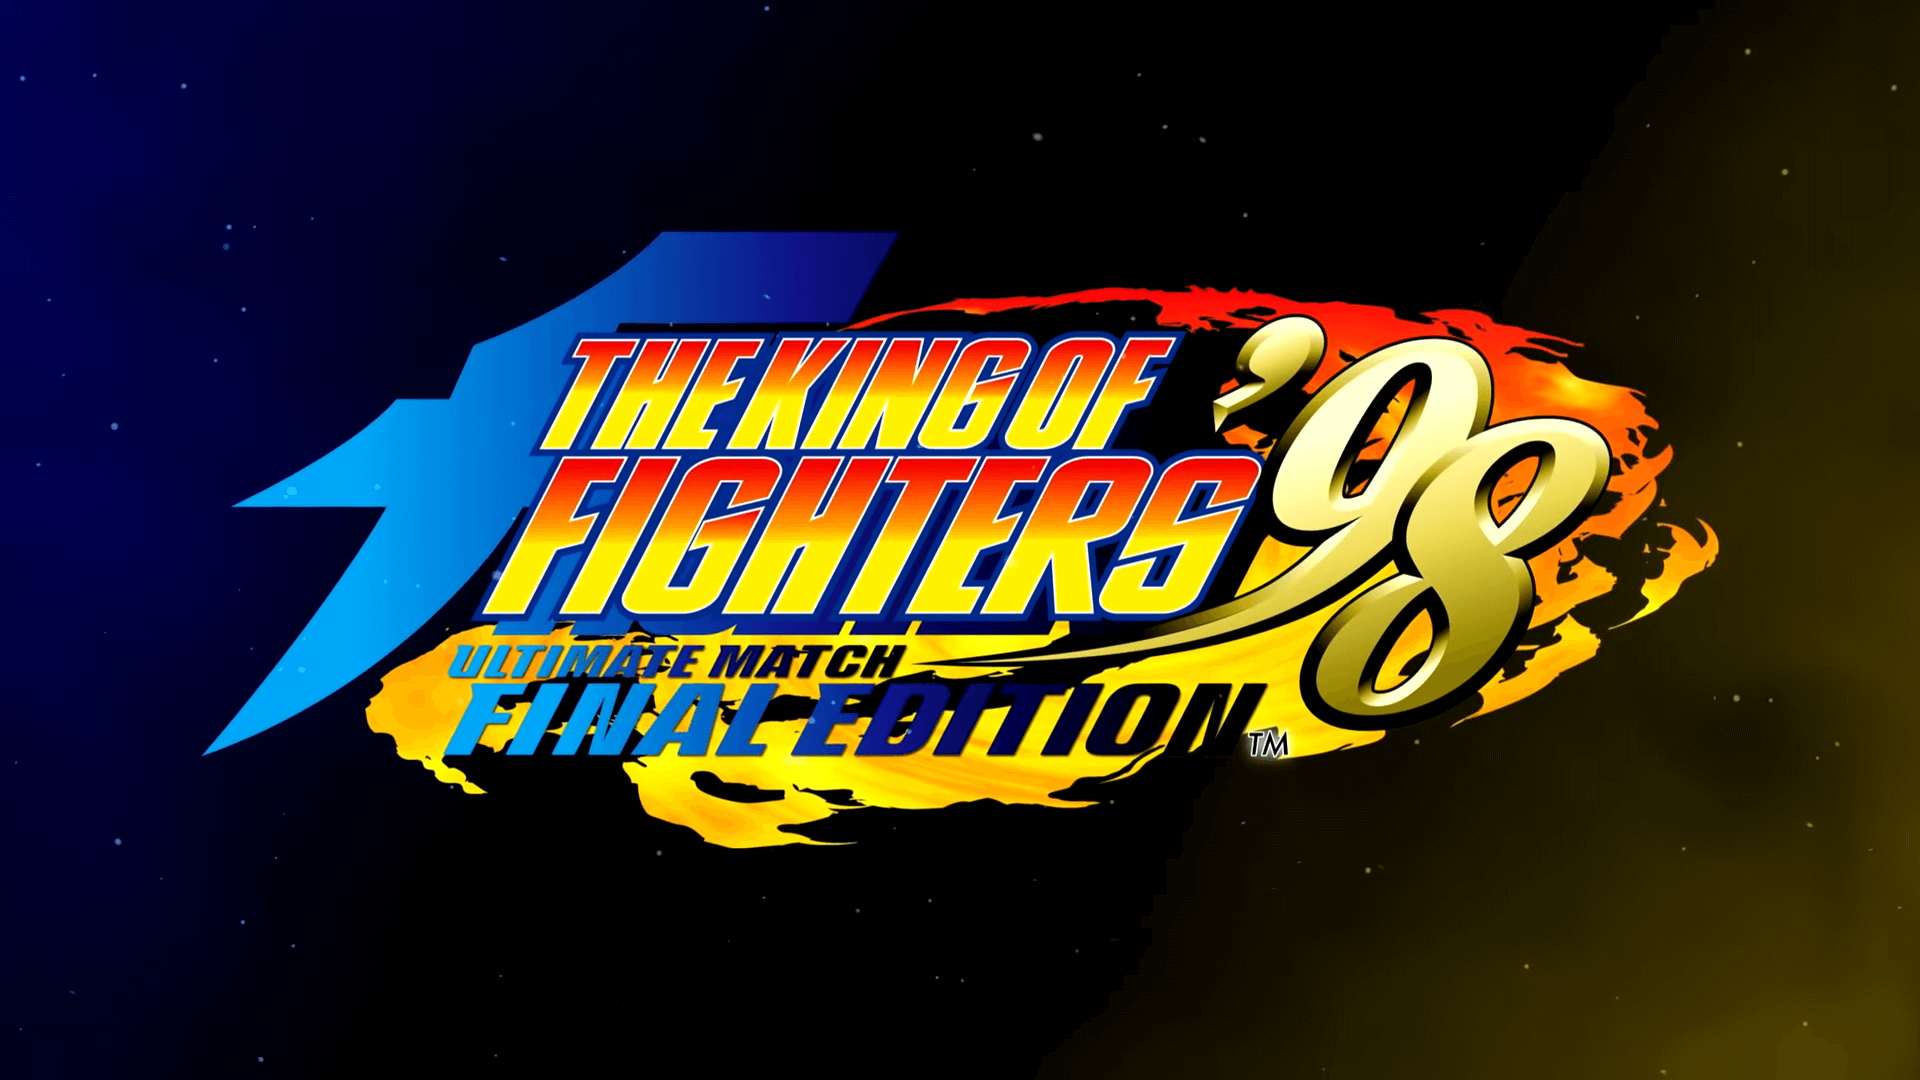 The Best Version of KoF '98 is Finally Coming to PS4!